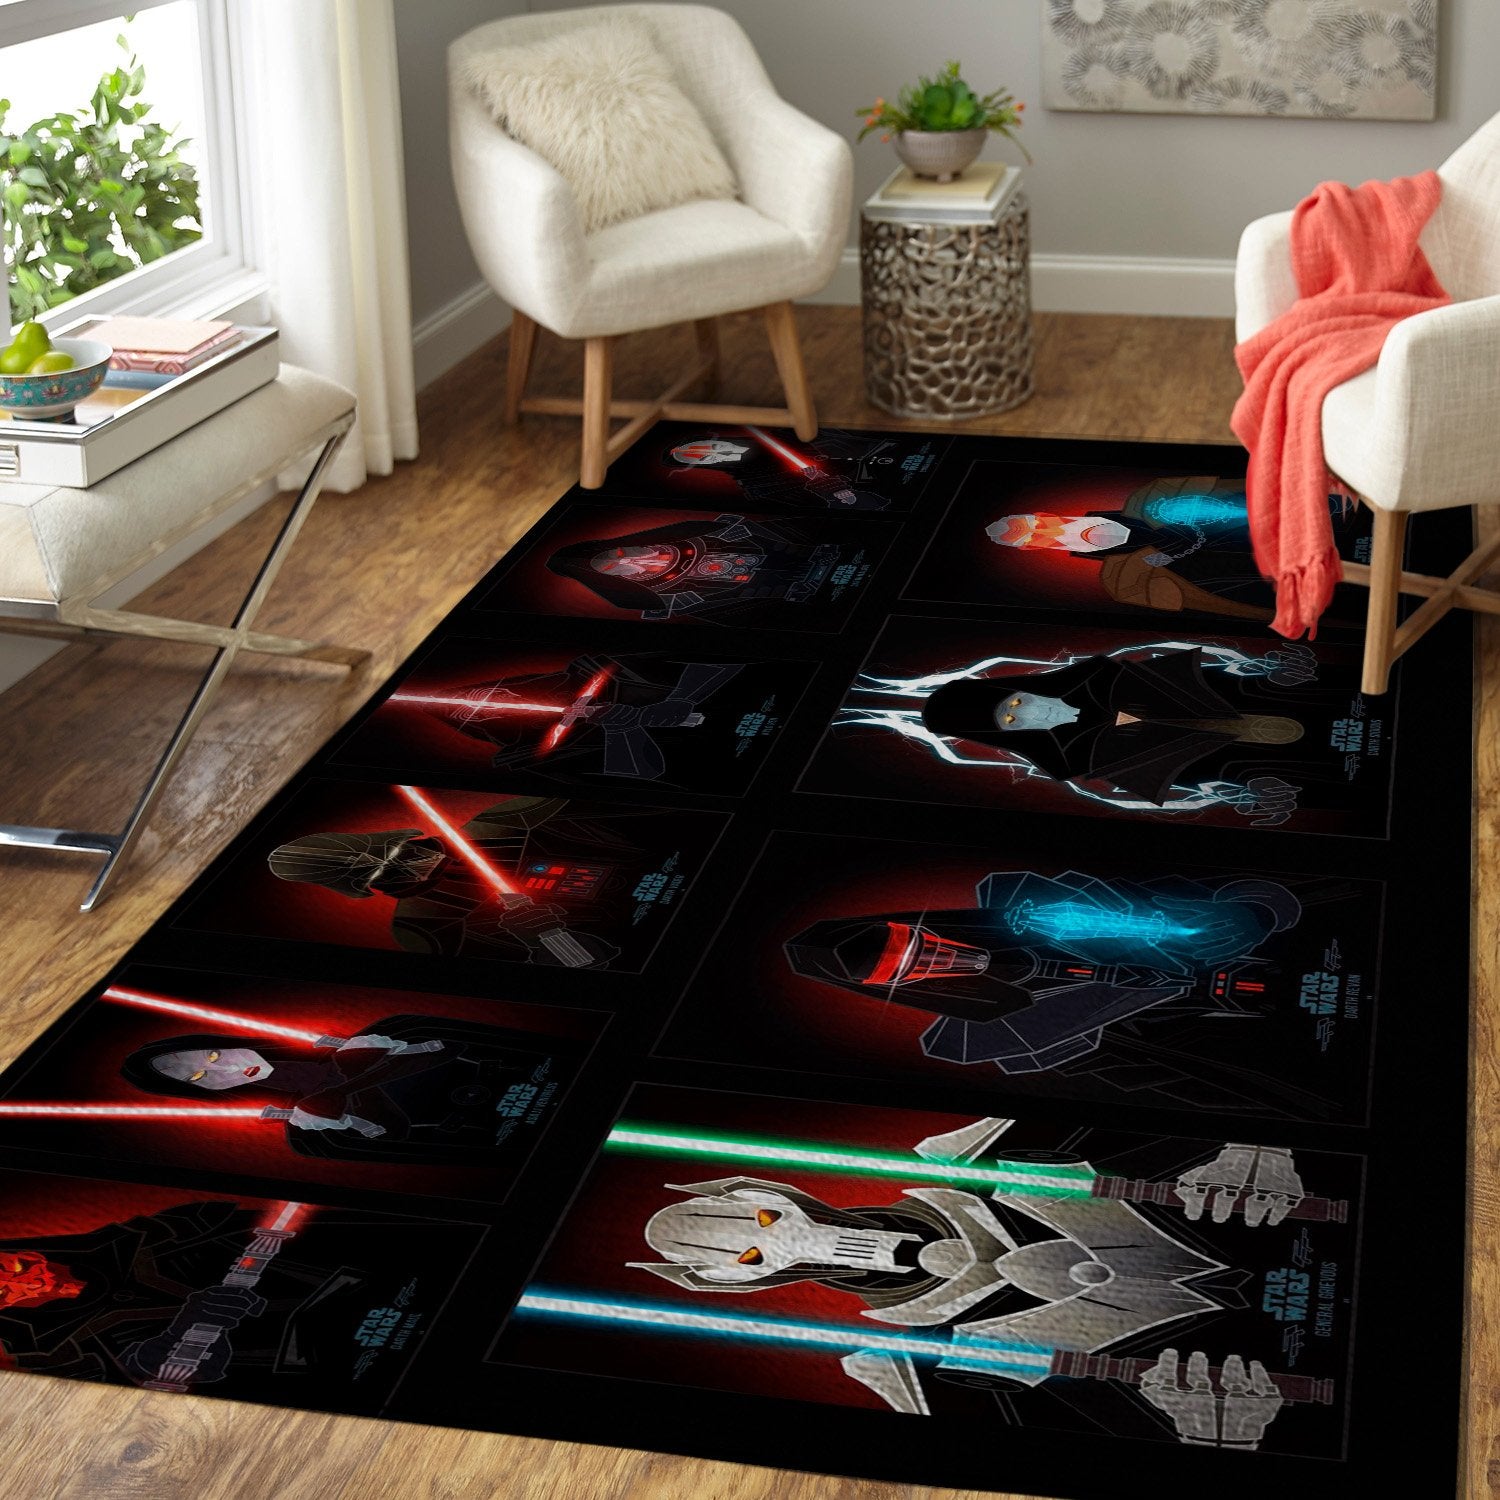 10 Star Wars Sith 3D Area Rug Living Room And Bed Room Home Decor Carpet